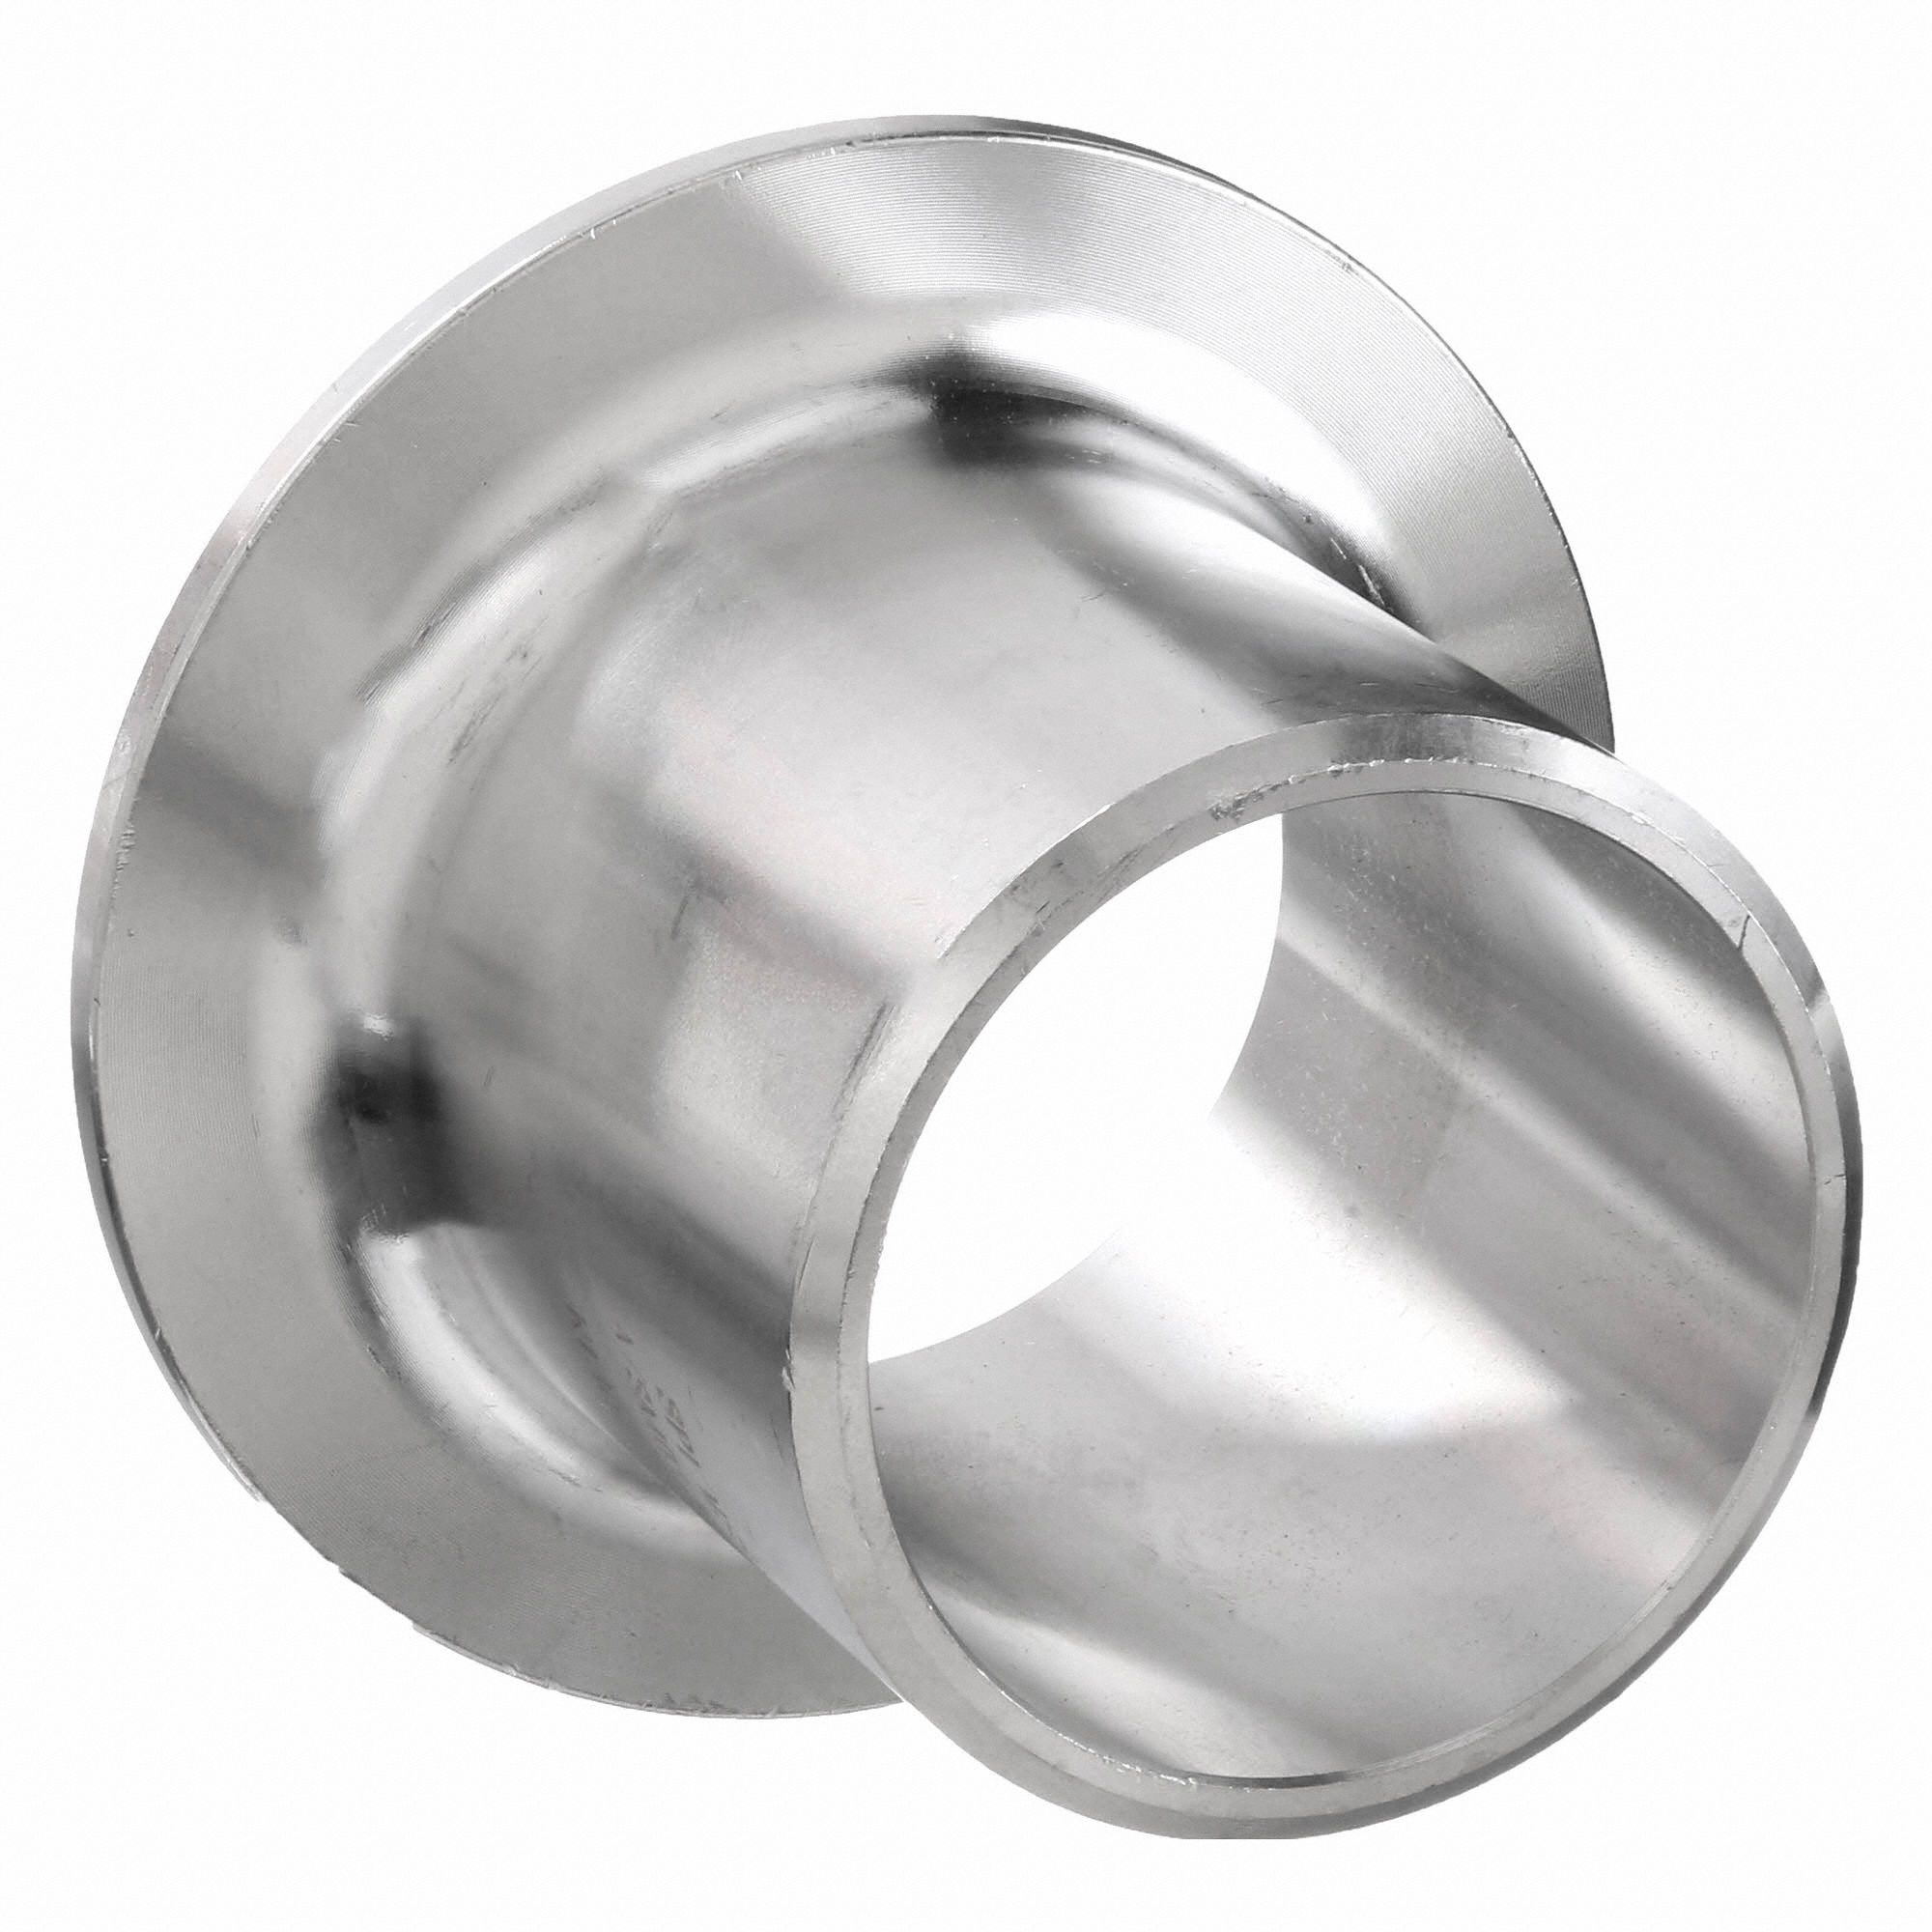 Smith Cooper 304l Stainless Steel Stub End Type A 3 In Pipe Size Pipe Fitting Schedule 40 5826